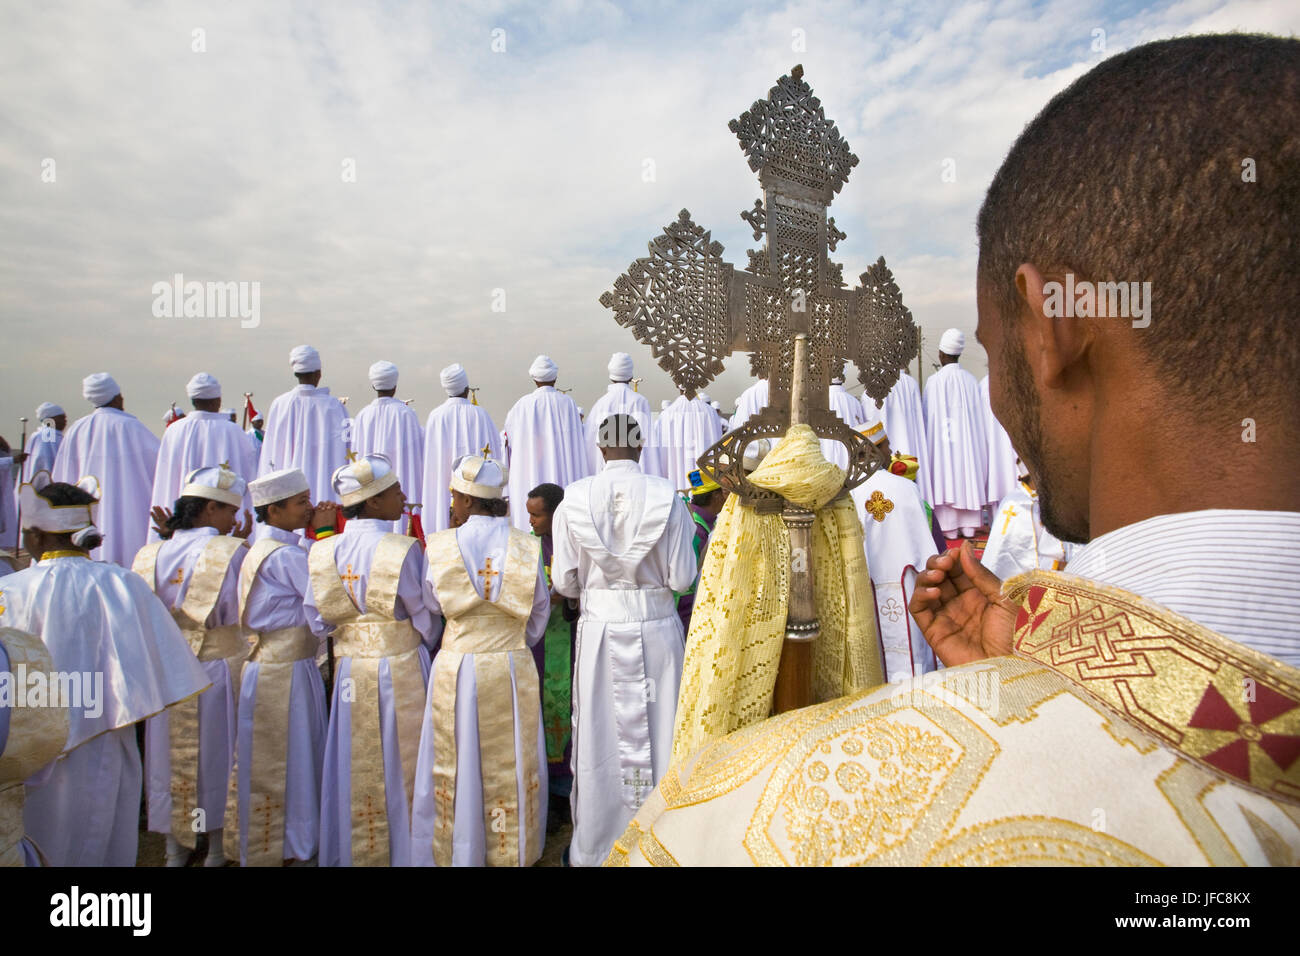 A group of priests is celebrating with white turbans and tunics the 2009 Timkat, the Orthodox Epiphany, in Addis Abeba, Ethiopia. Stock Photo